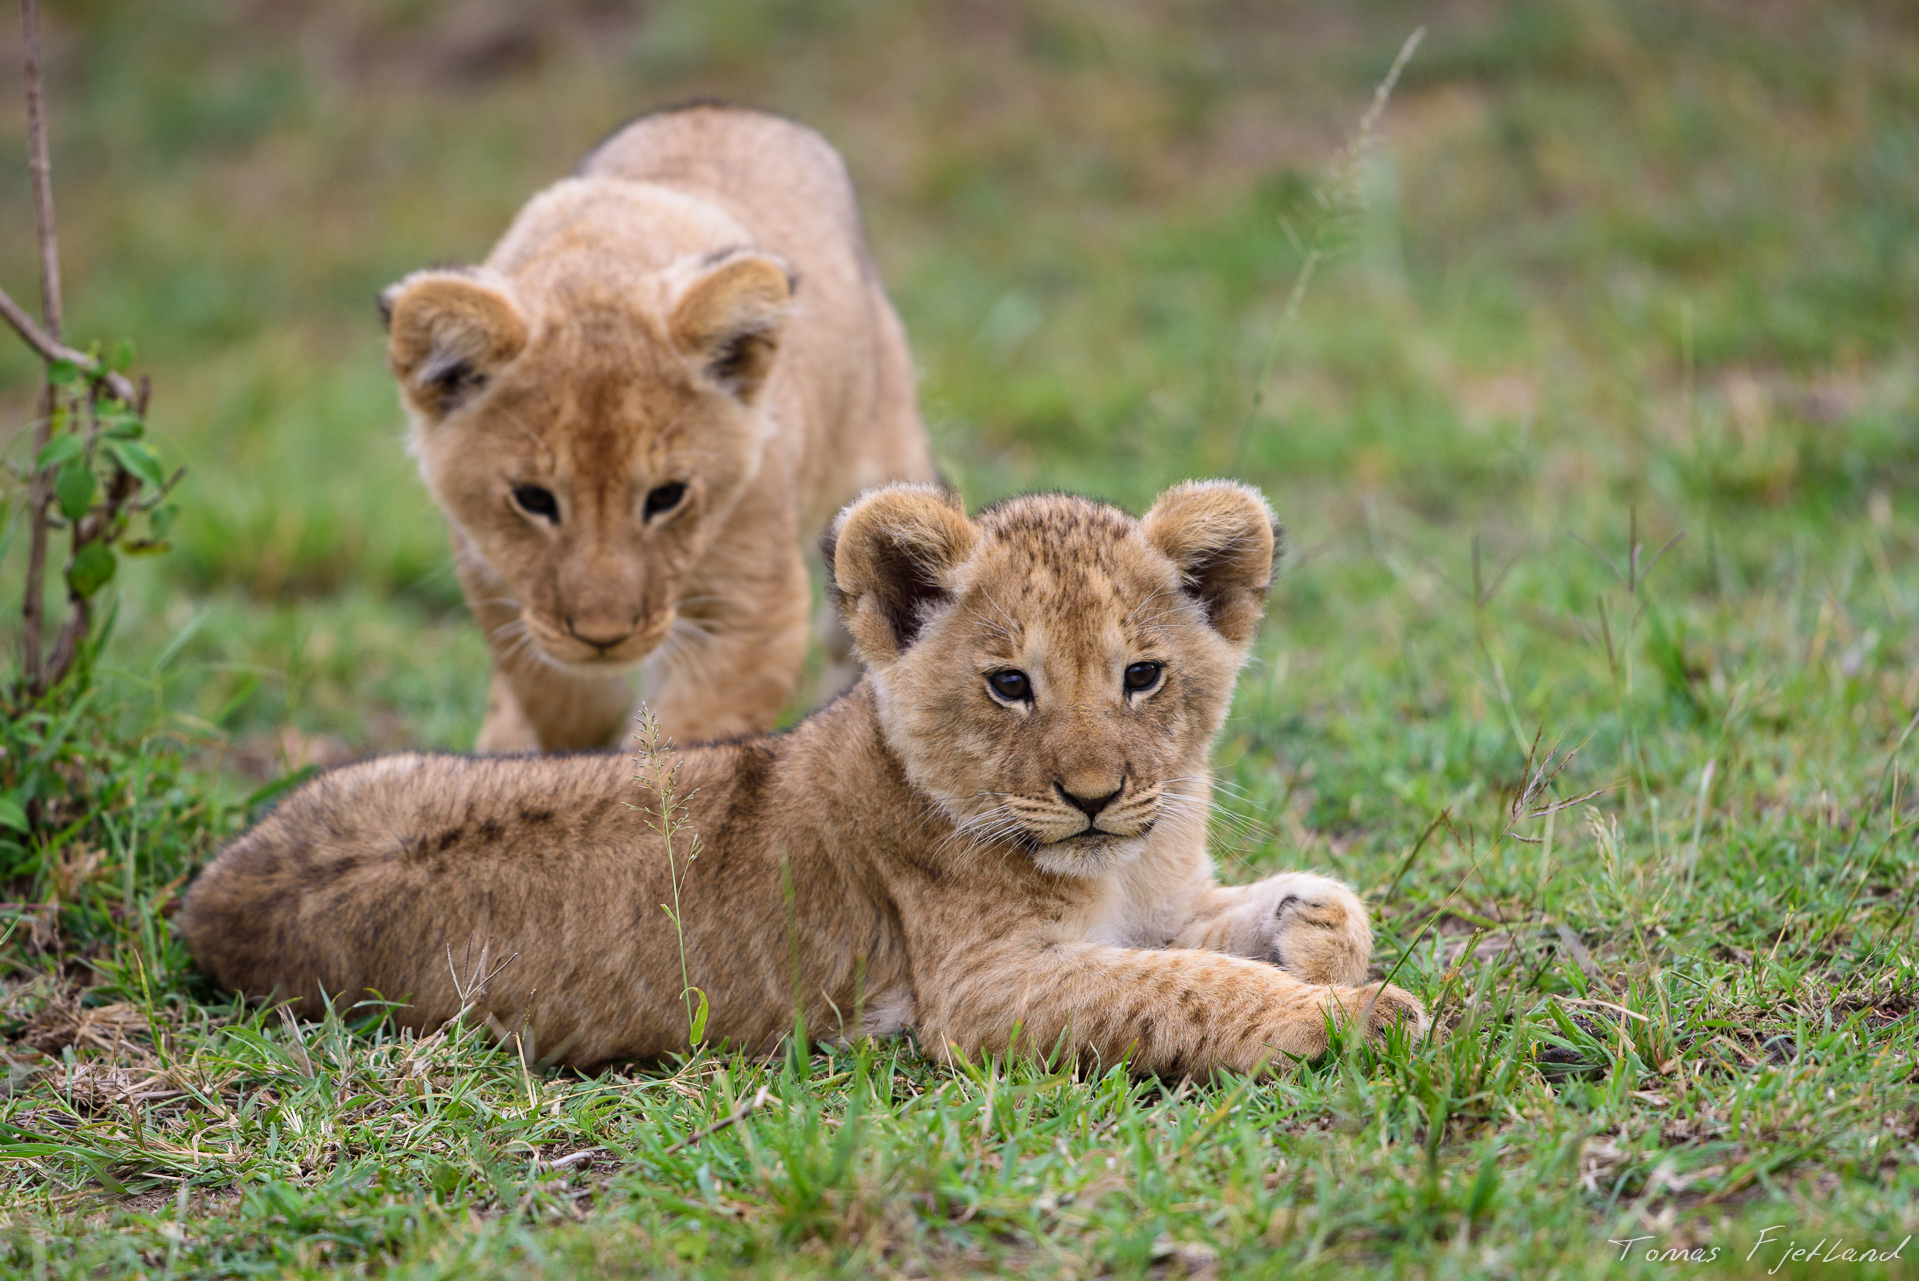 A cub practices its sneaking skills on a sibling.